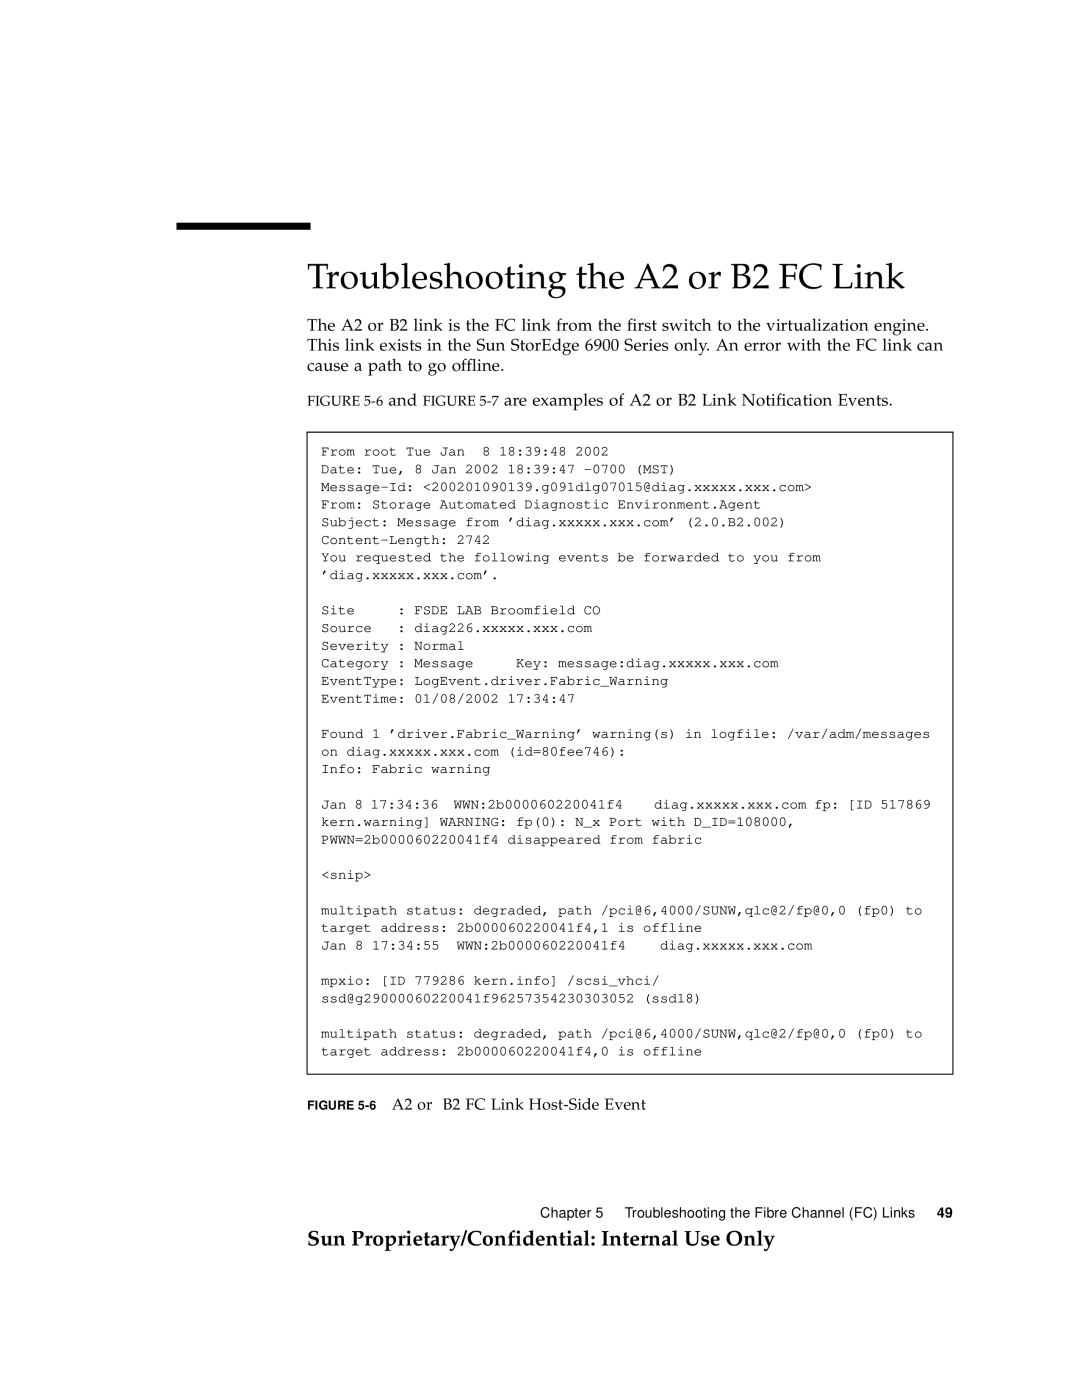 Sun Microsystems 6900, 3900 manual Troubleshooting the A2 or B2 FC Link, Sun Proprietary/Confidential Internal Use Only 